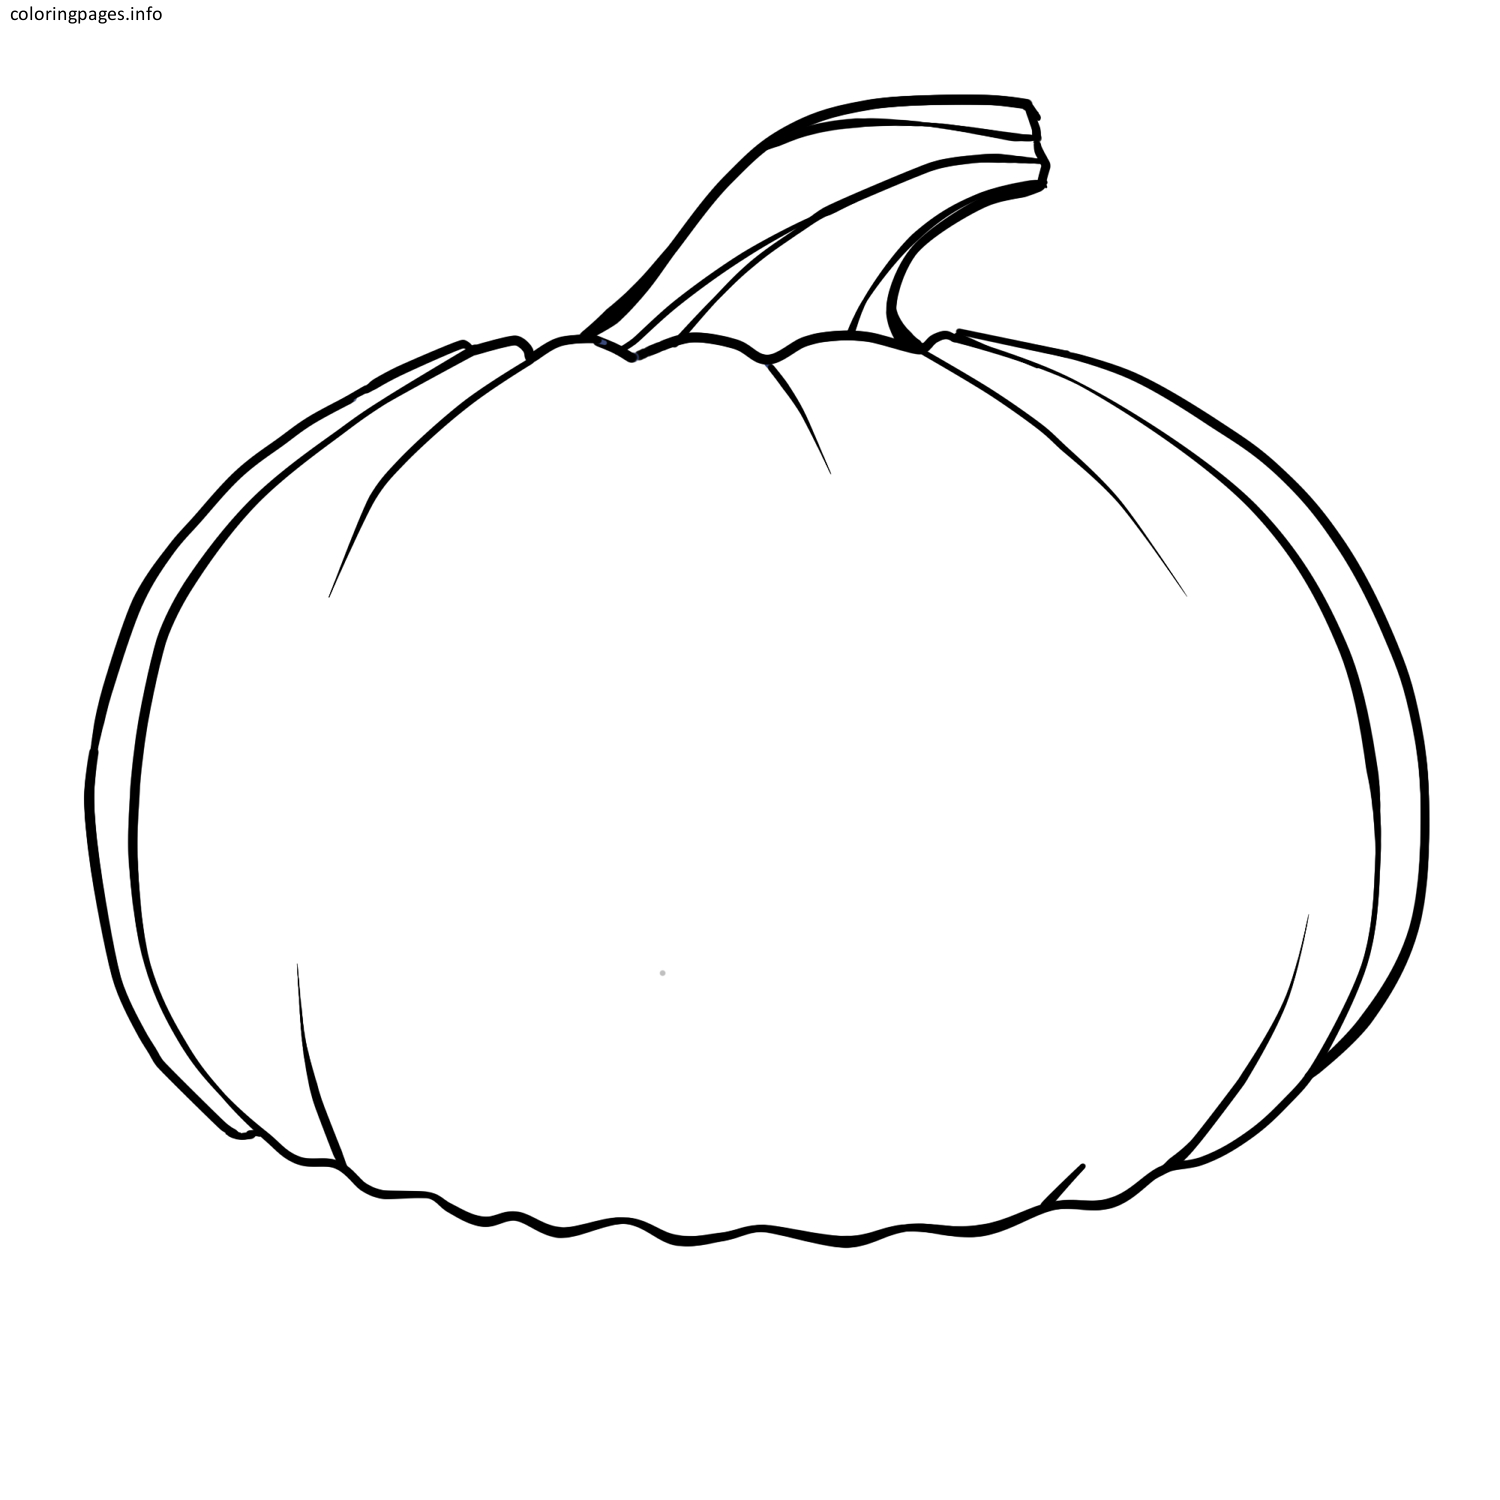 Blank Pumpkin Coloring Pages | Free Printable | Pumpkin Coloring - Pumpkin Shape Template Printable Free